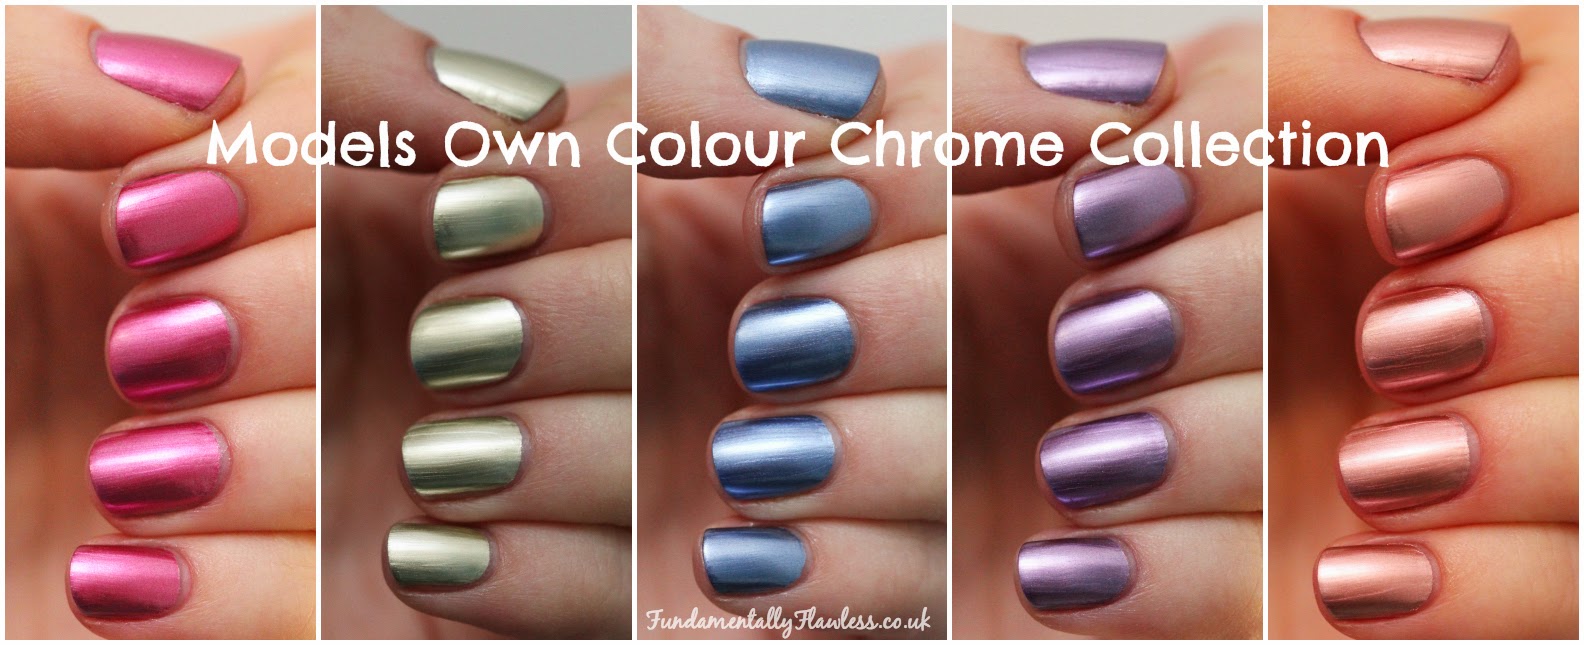 Models Own Colour Chrome Collection Swatches and Review